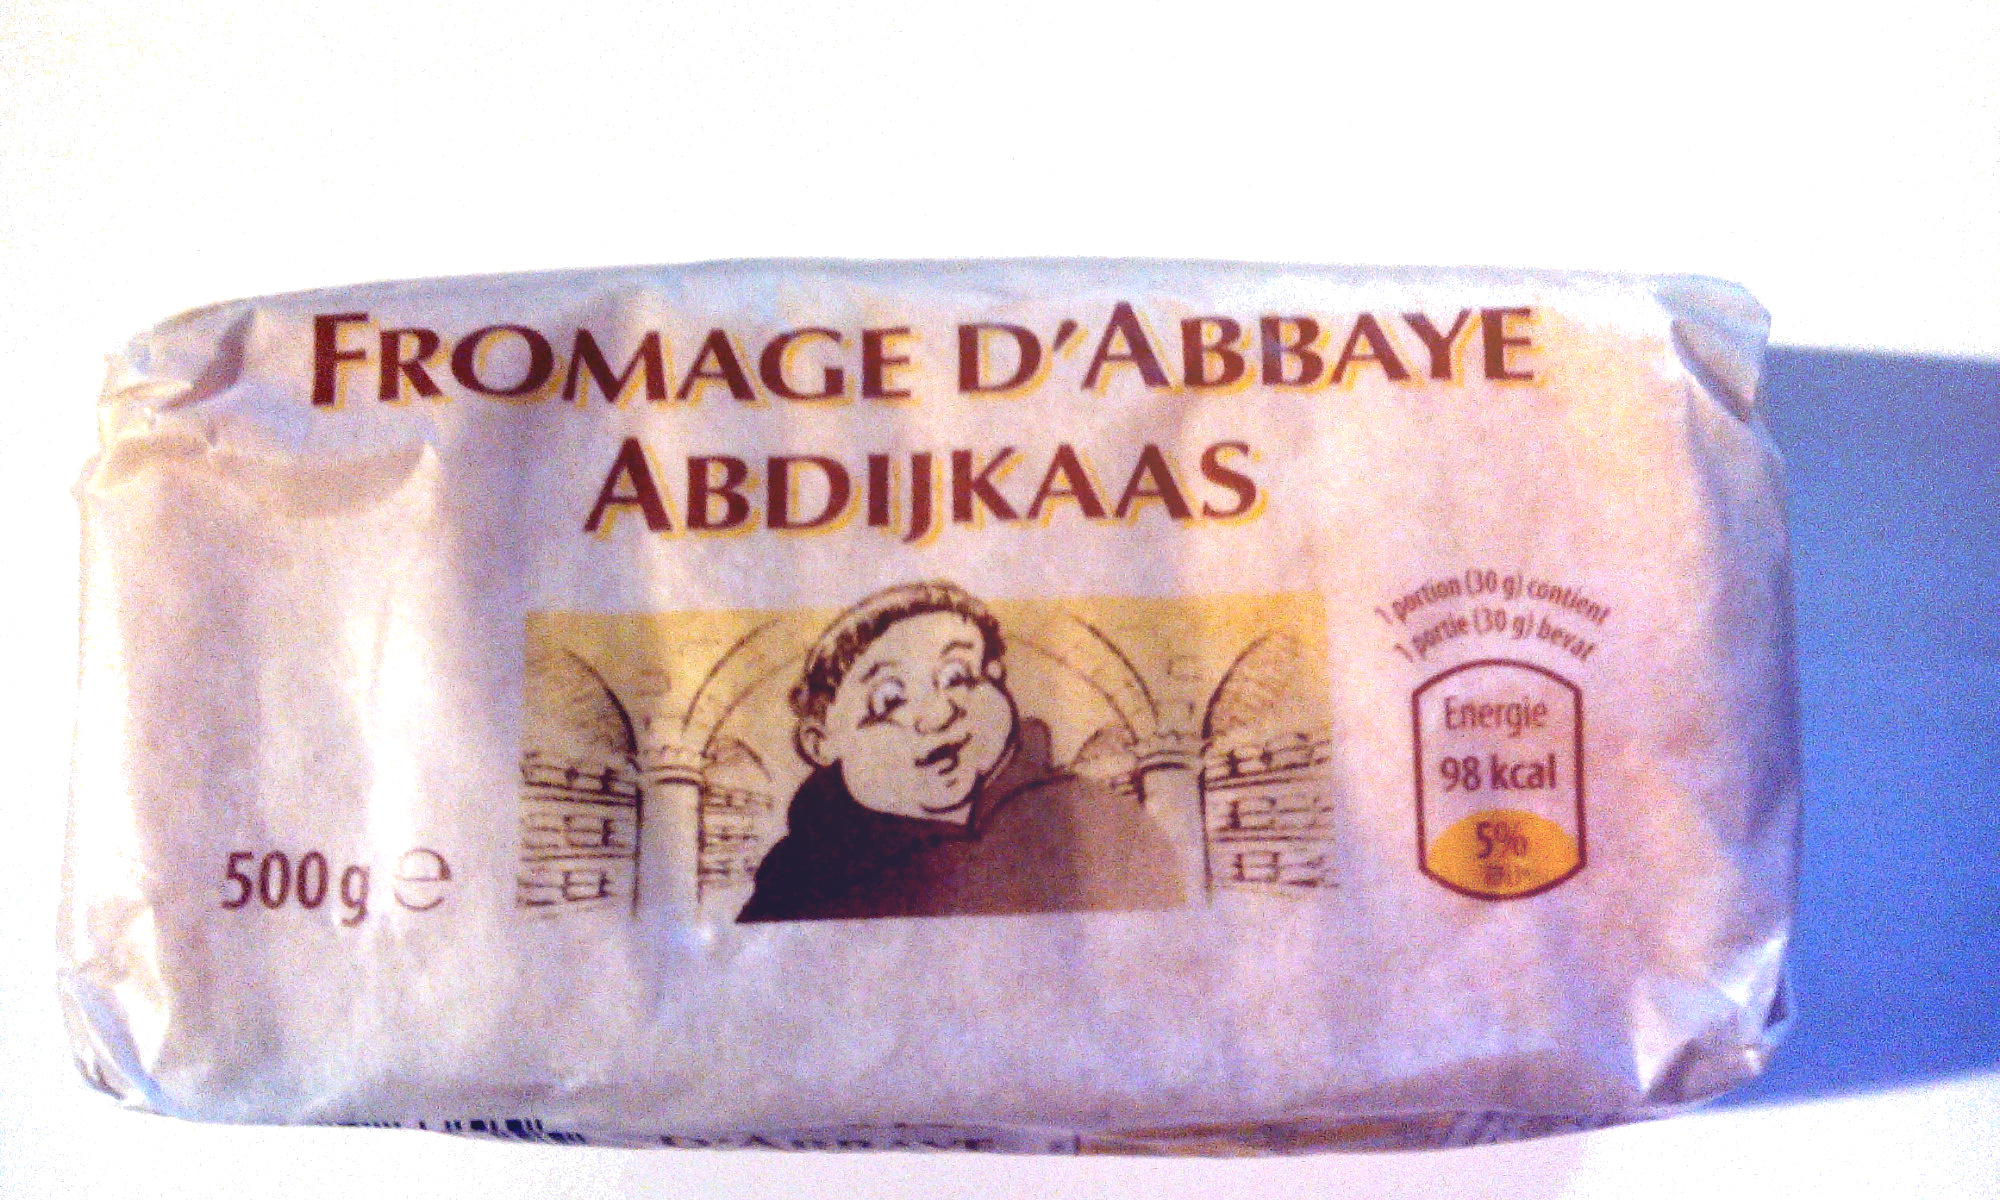 Fromage d'abbaye - Abdijkaas - Producto - fr